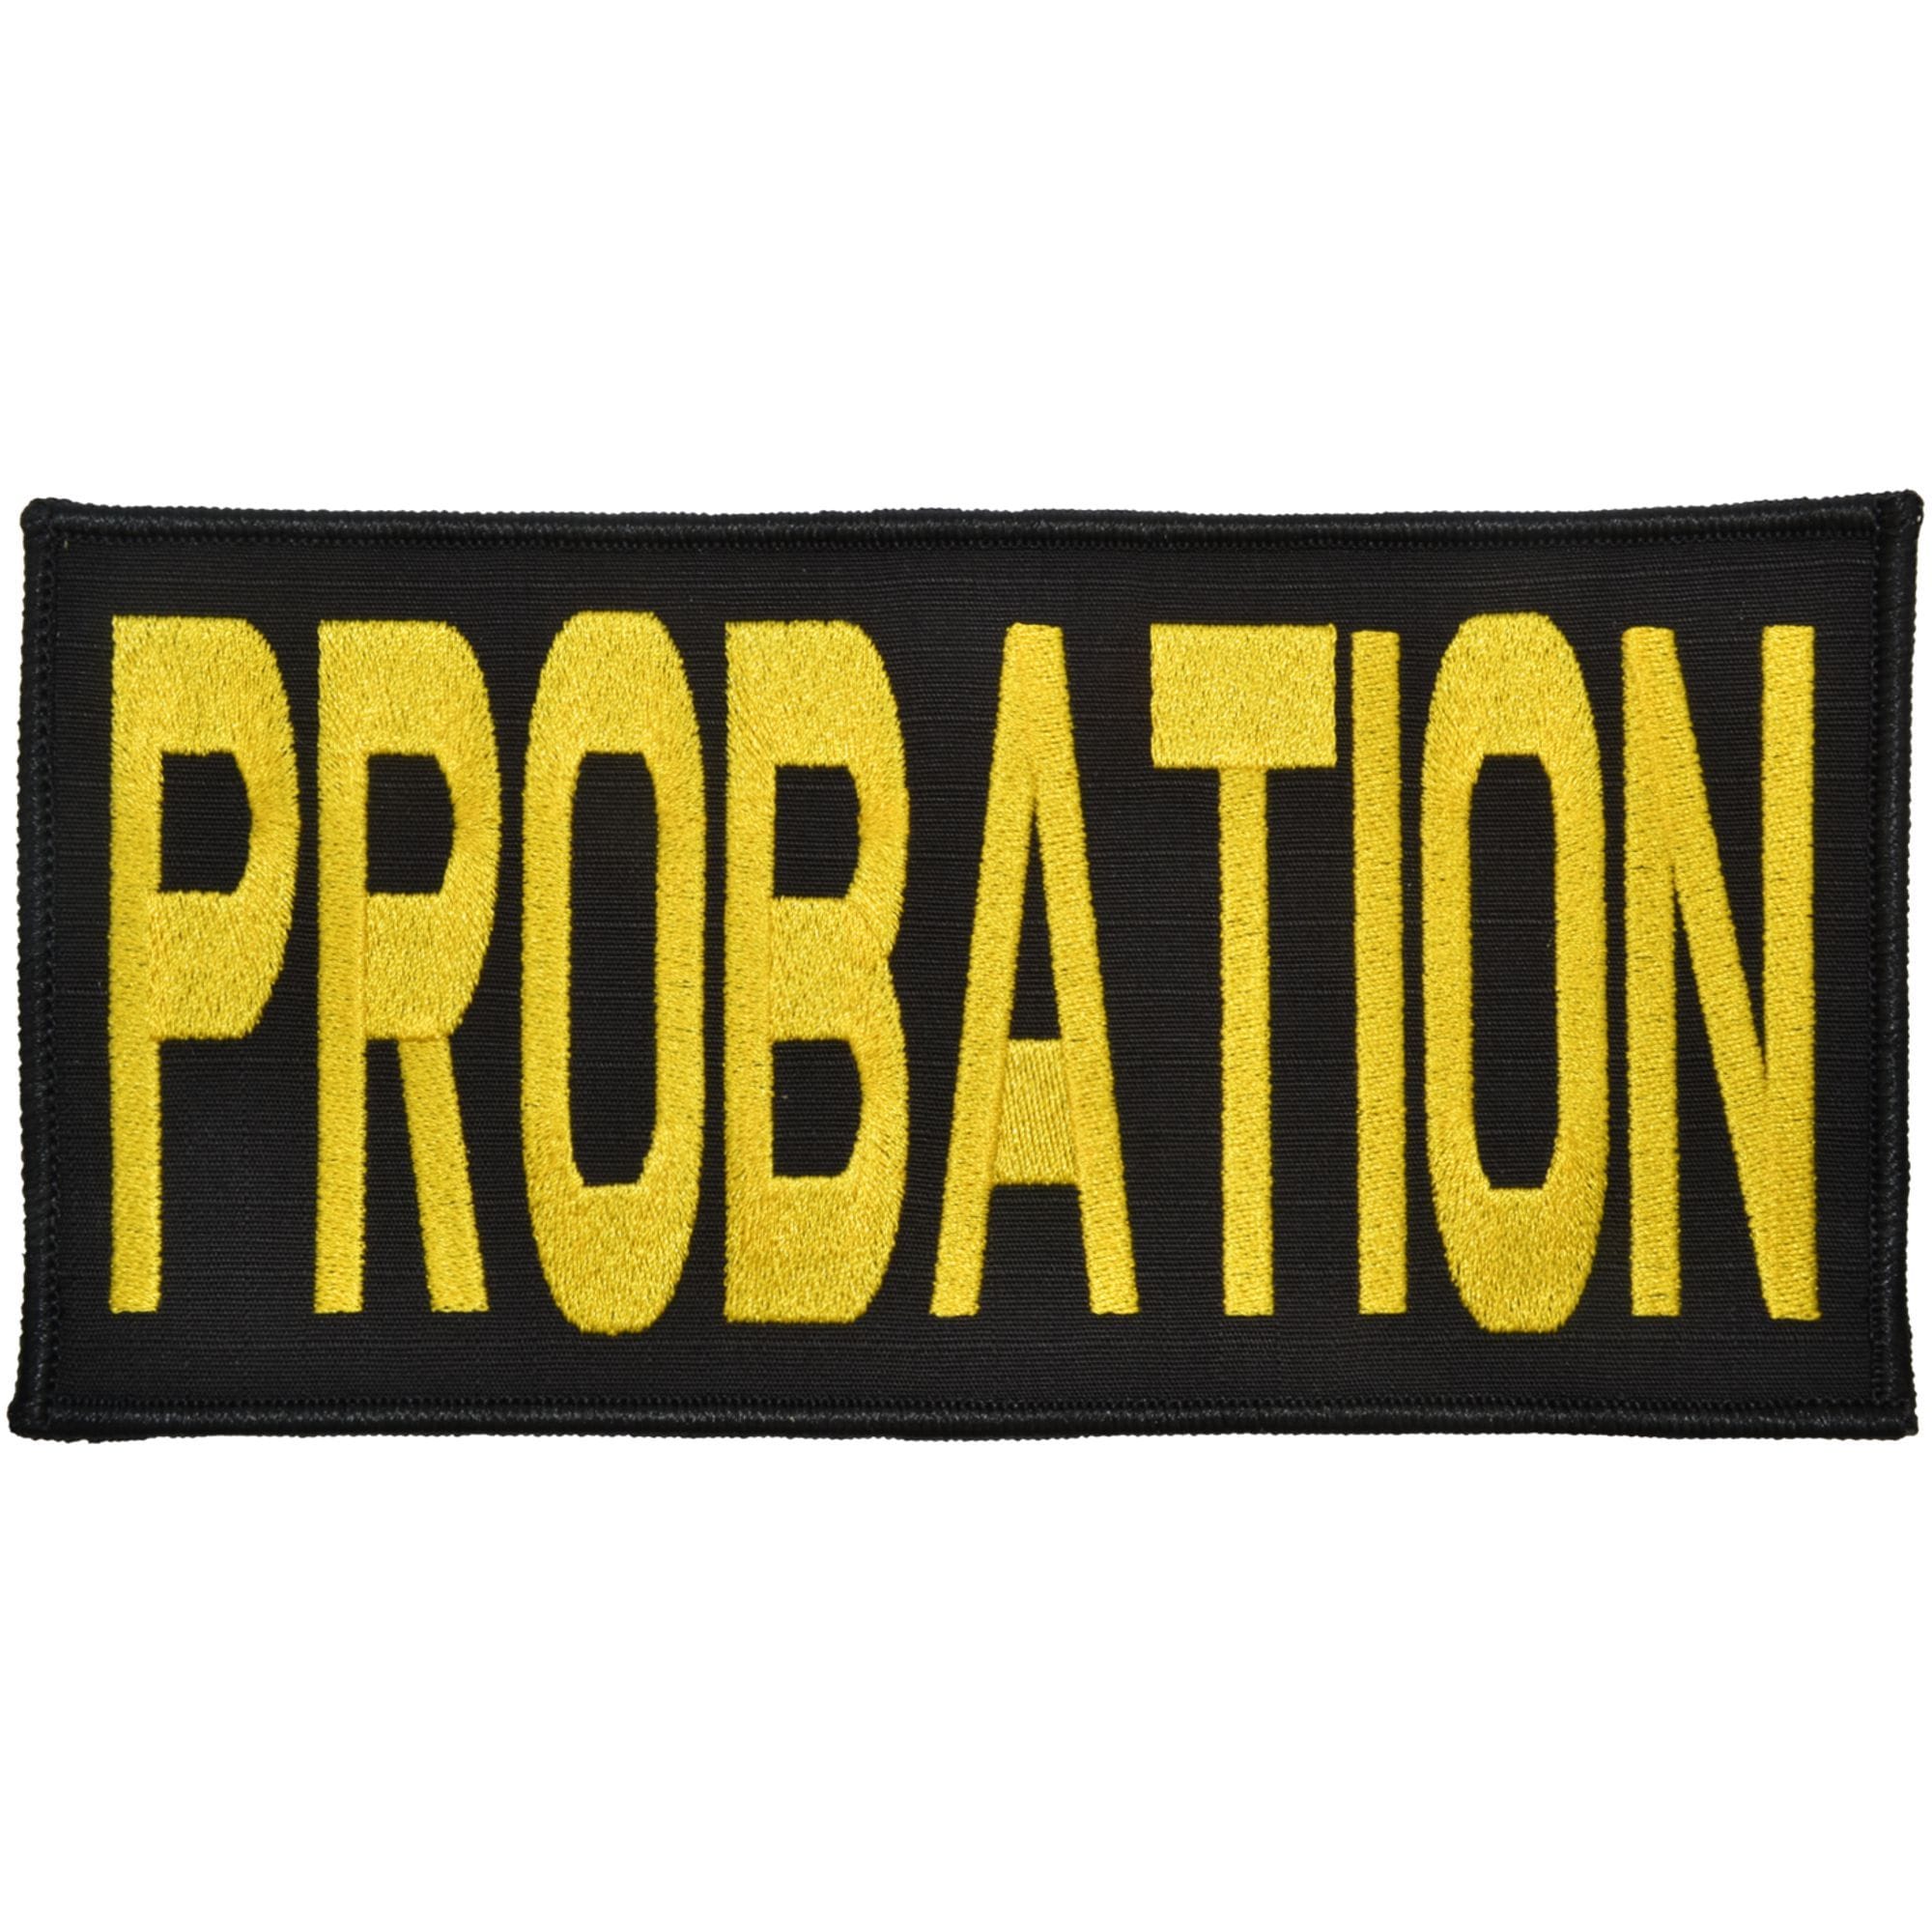 Tactical Gear Junkie Patches Probation 1 Plate Carrier - 4x8 Patch